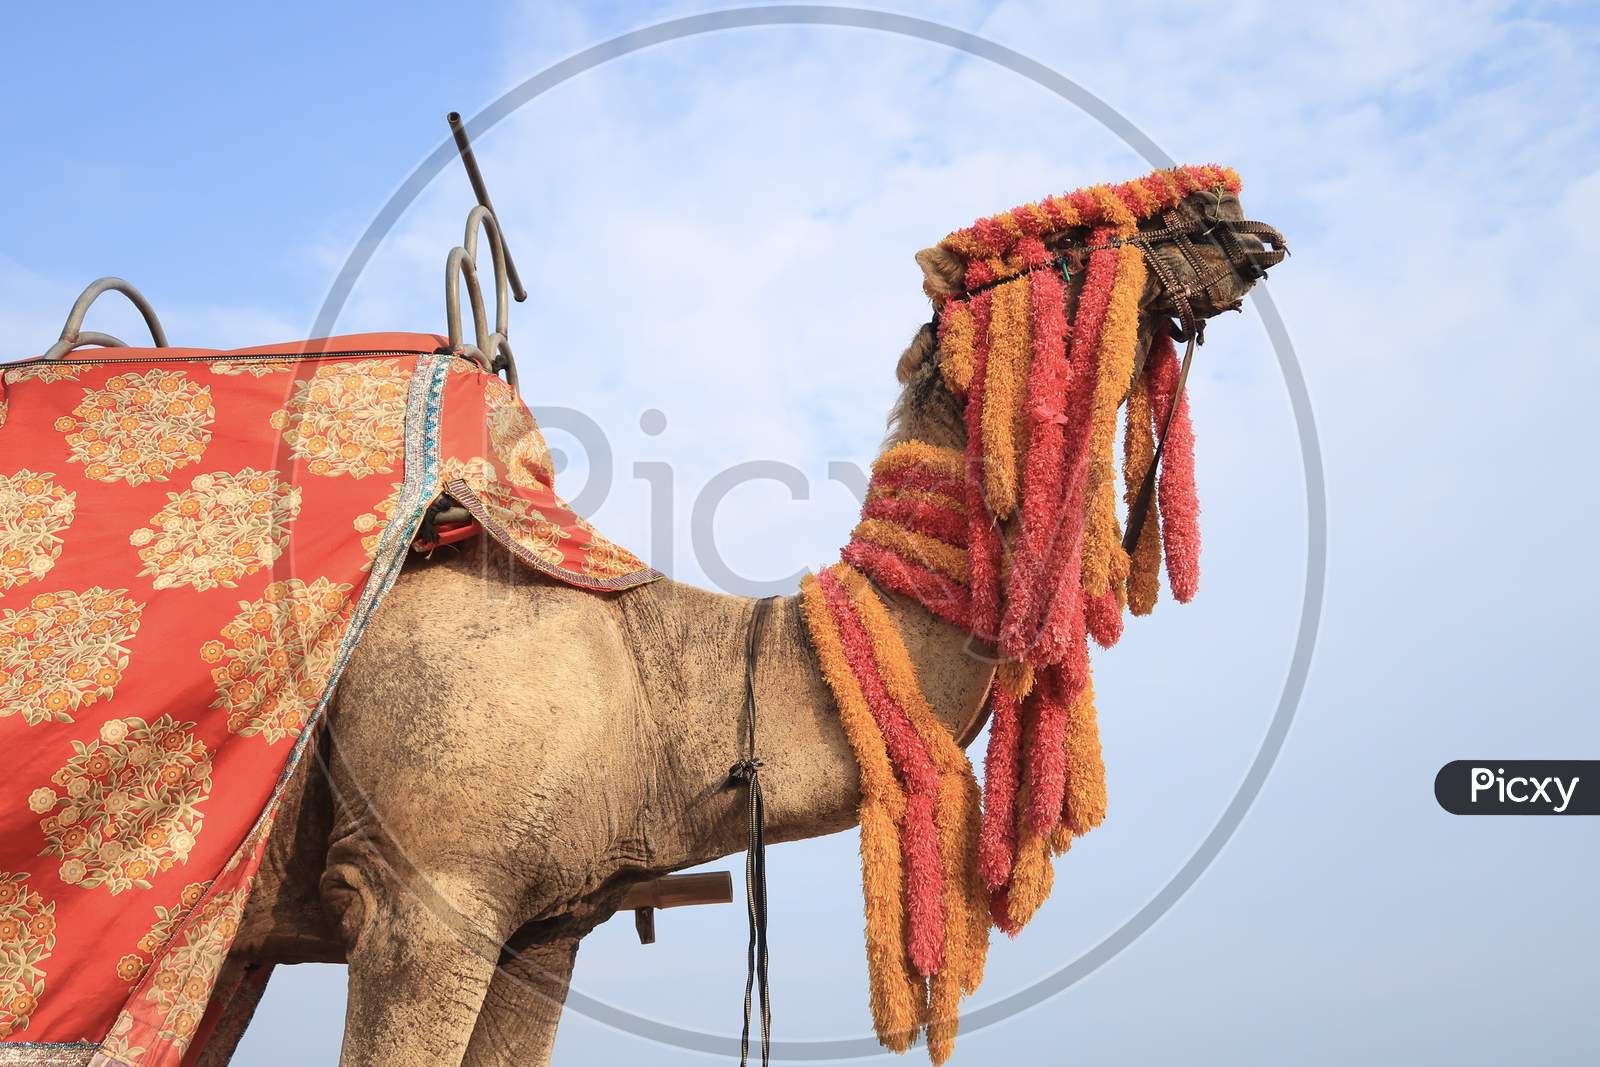 A decorated Camel ready to offer happy ride